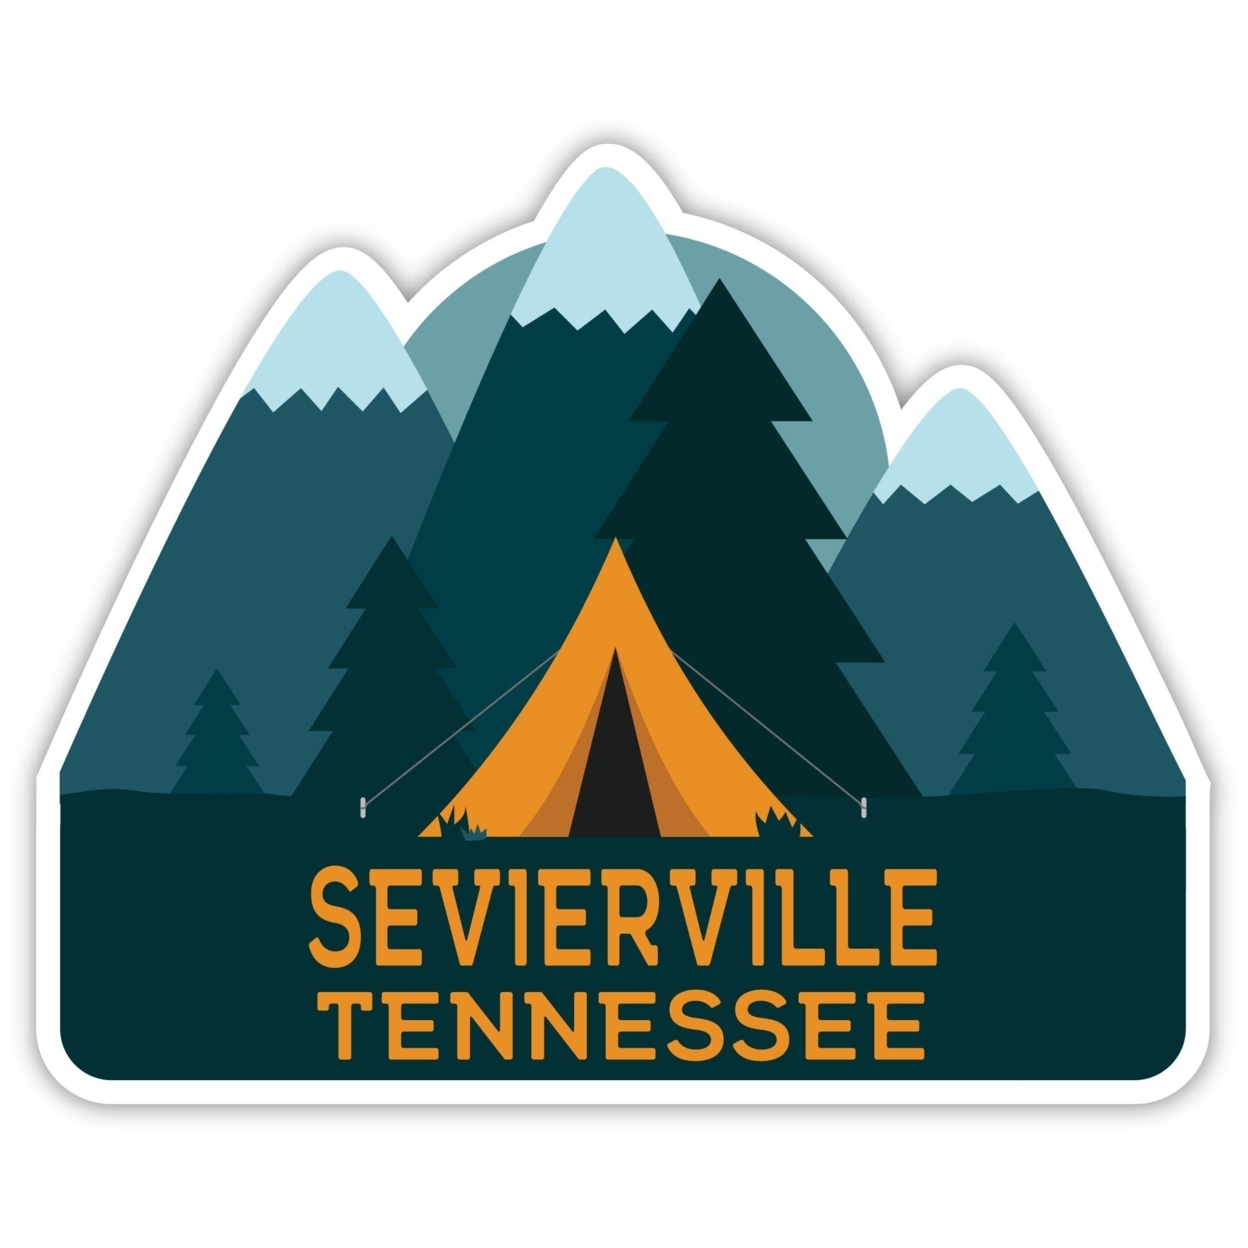 Sevierville Tennessee Souvenir Decorative Stickers (Choose Theme And Size) - Single Unit, 2-Inch, Tent